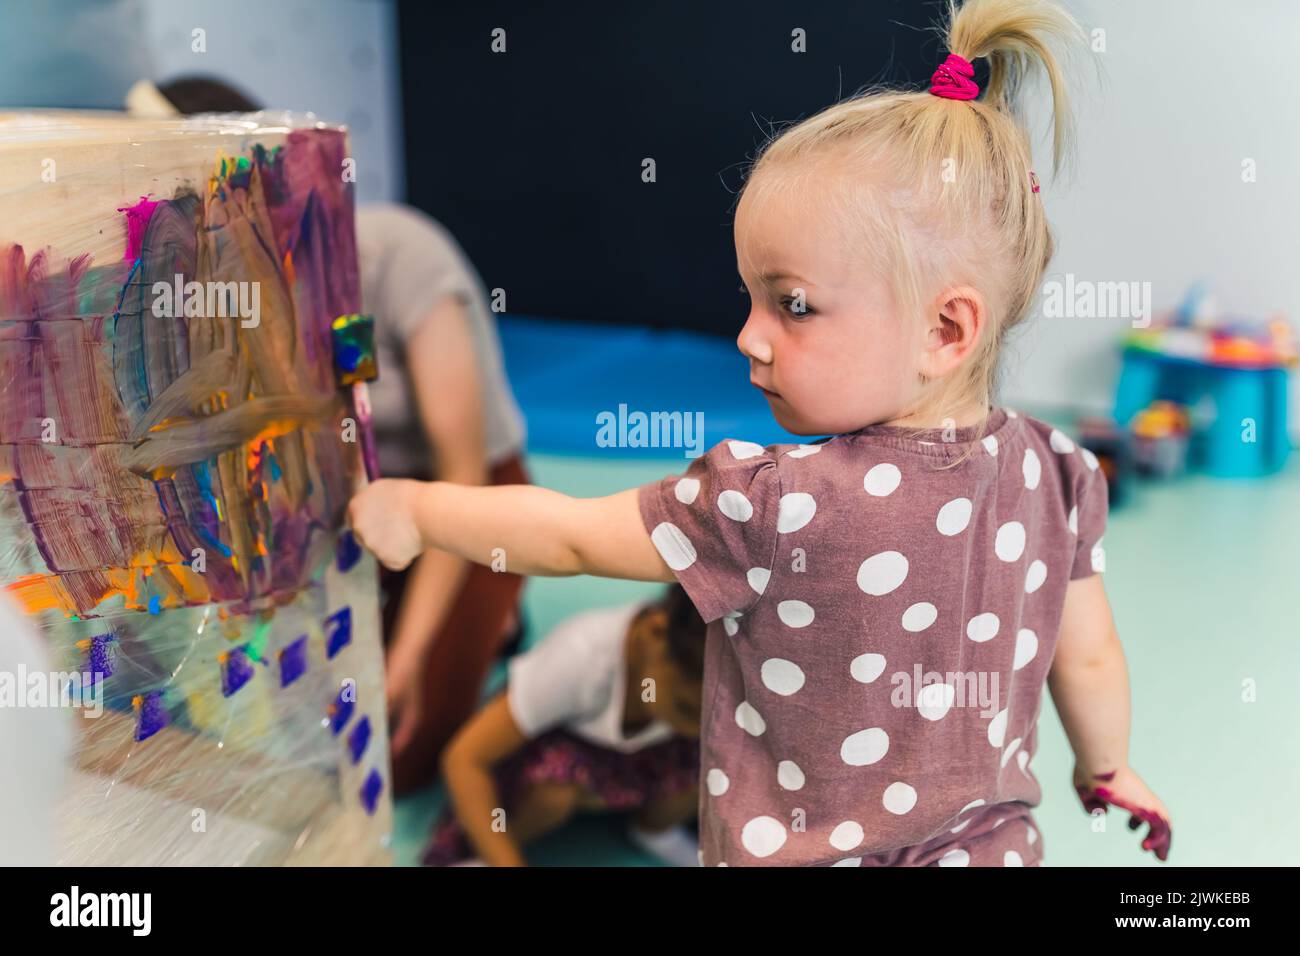 Cling film painting. Little caucasian girl toddler painting with her arms on a cling film wrapped all the way round the wooden shelf unit. Creative activity for kids development at the nursery school. High quality photo Stock Photo